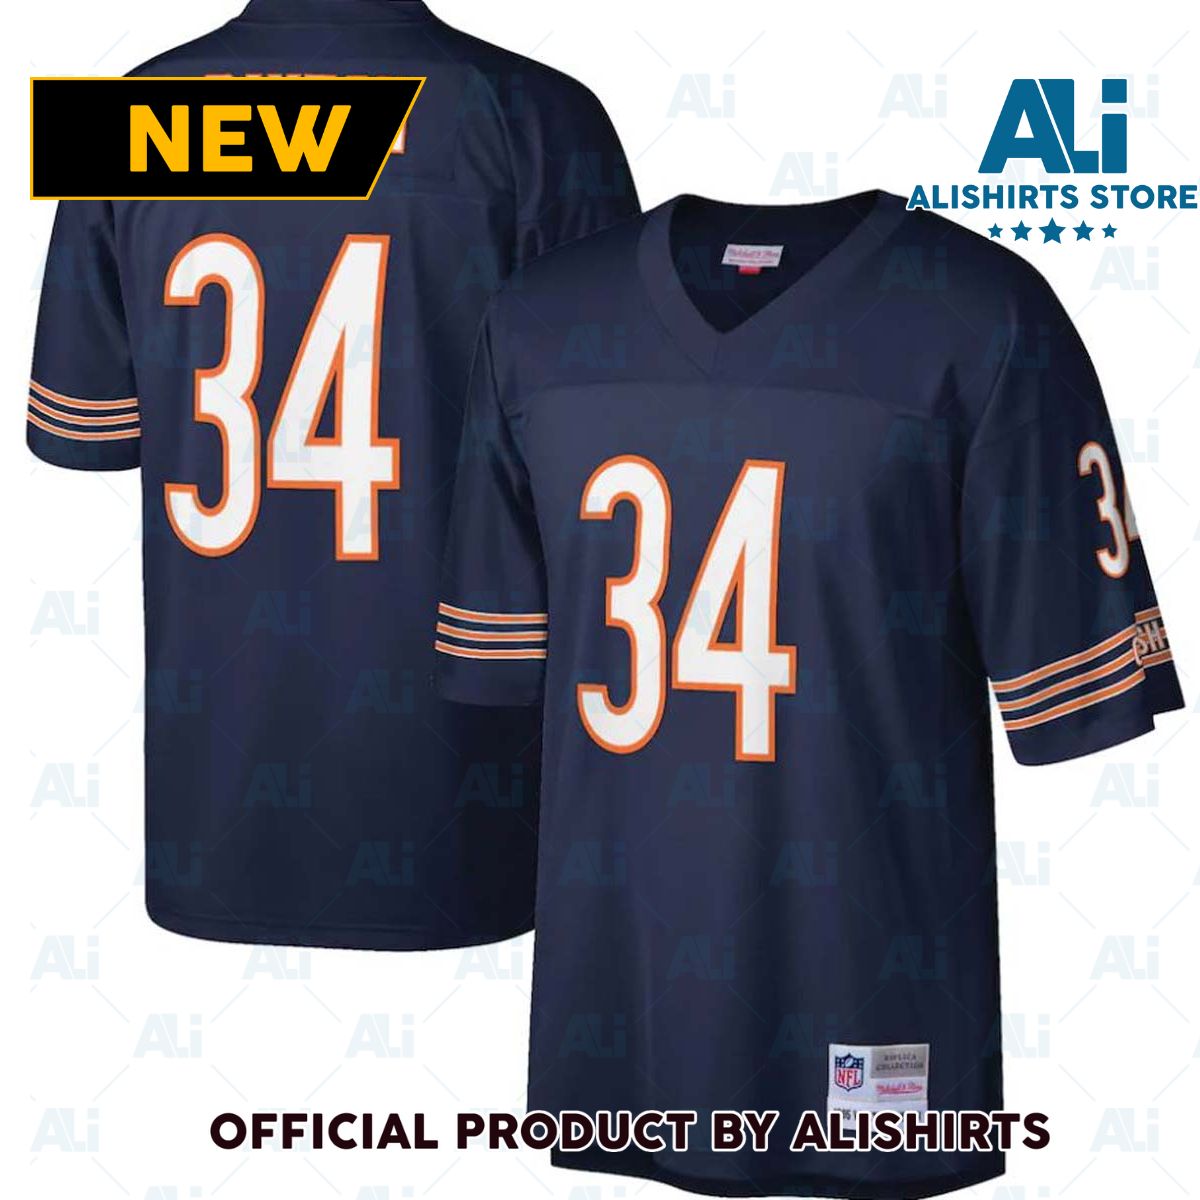 Mitchell and Ness Chicago Bears Walter Payton  34 Replica NFL Football Jersey